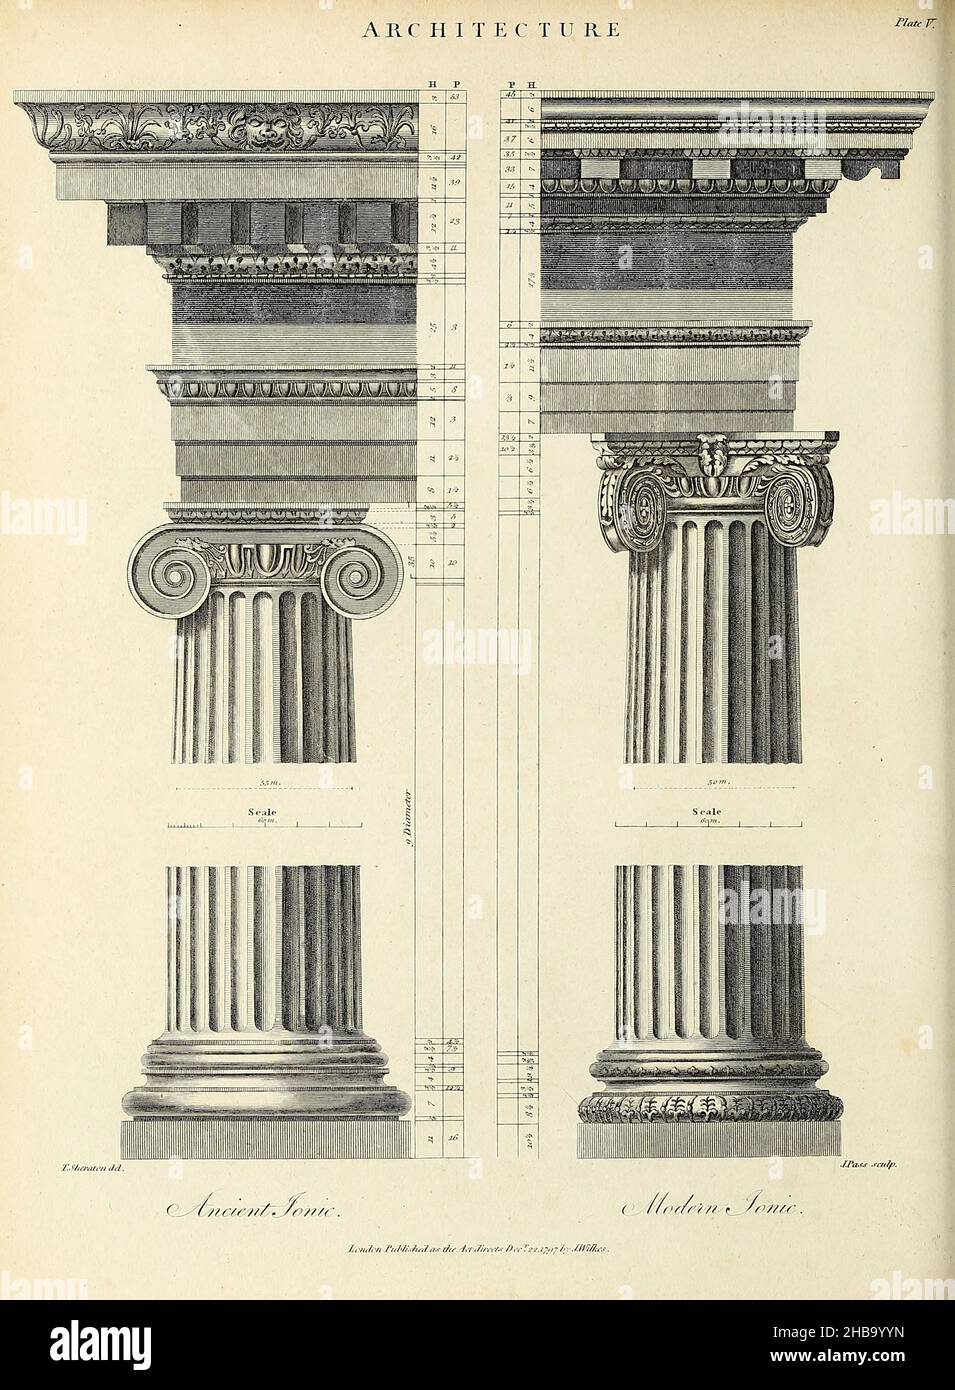 Illustration of ancient and modern Ionic orders. Copperplate engraving from the 'Encyclopaedia Londinensis, or, Universal Dictionary of Arts, Sciences and Literature; Volume II. Edited by John Wilkes. Published in London, Great, Britain, in 1810. Stock Photo